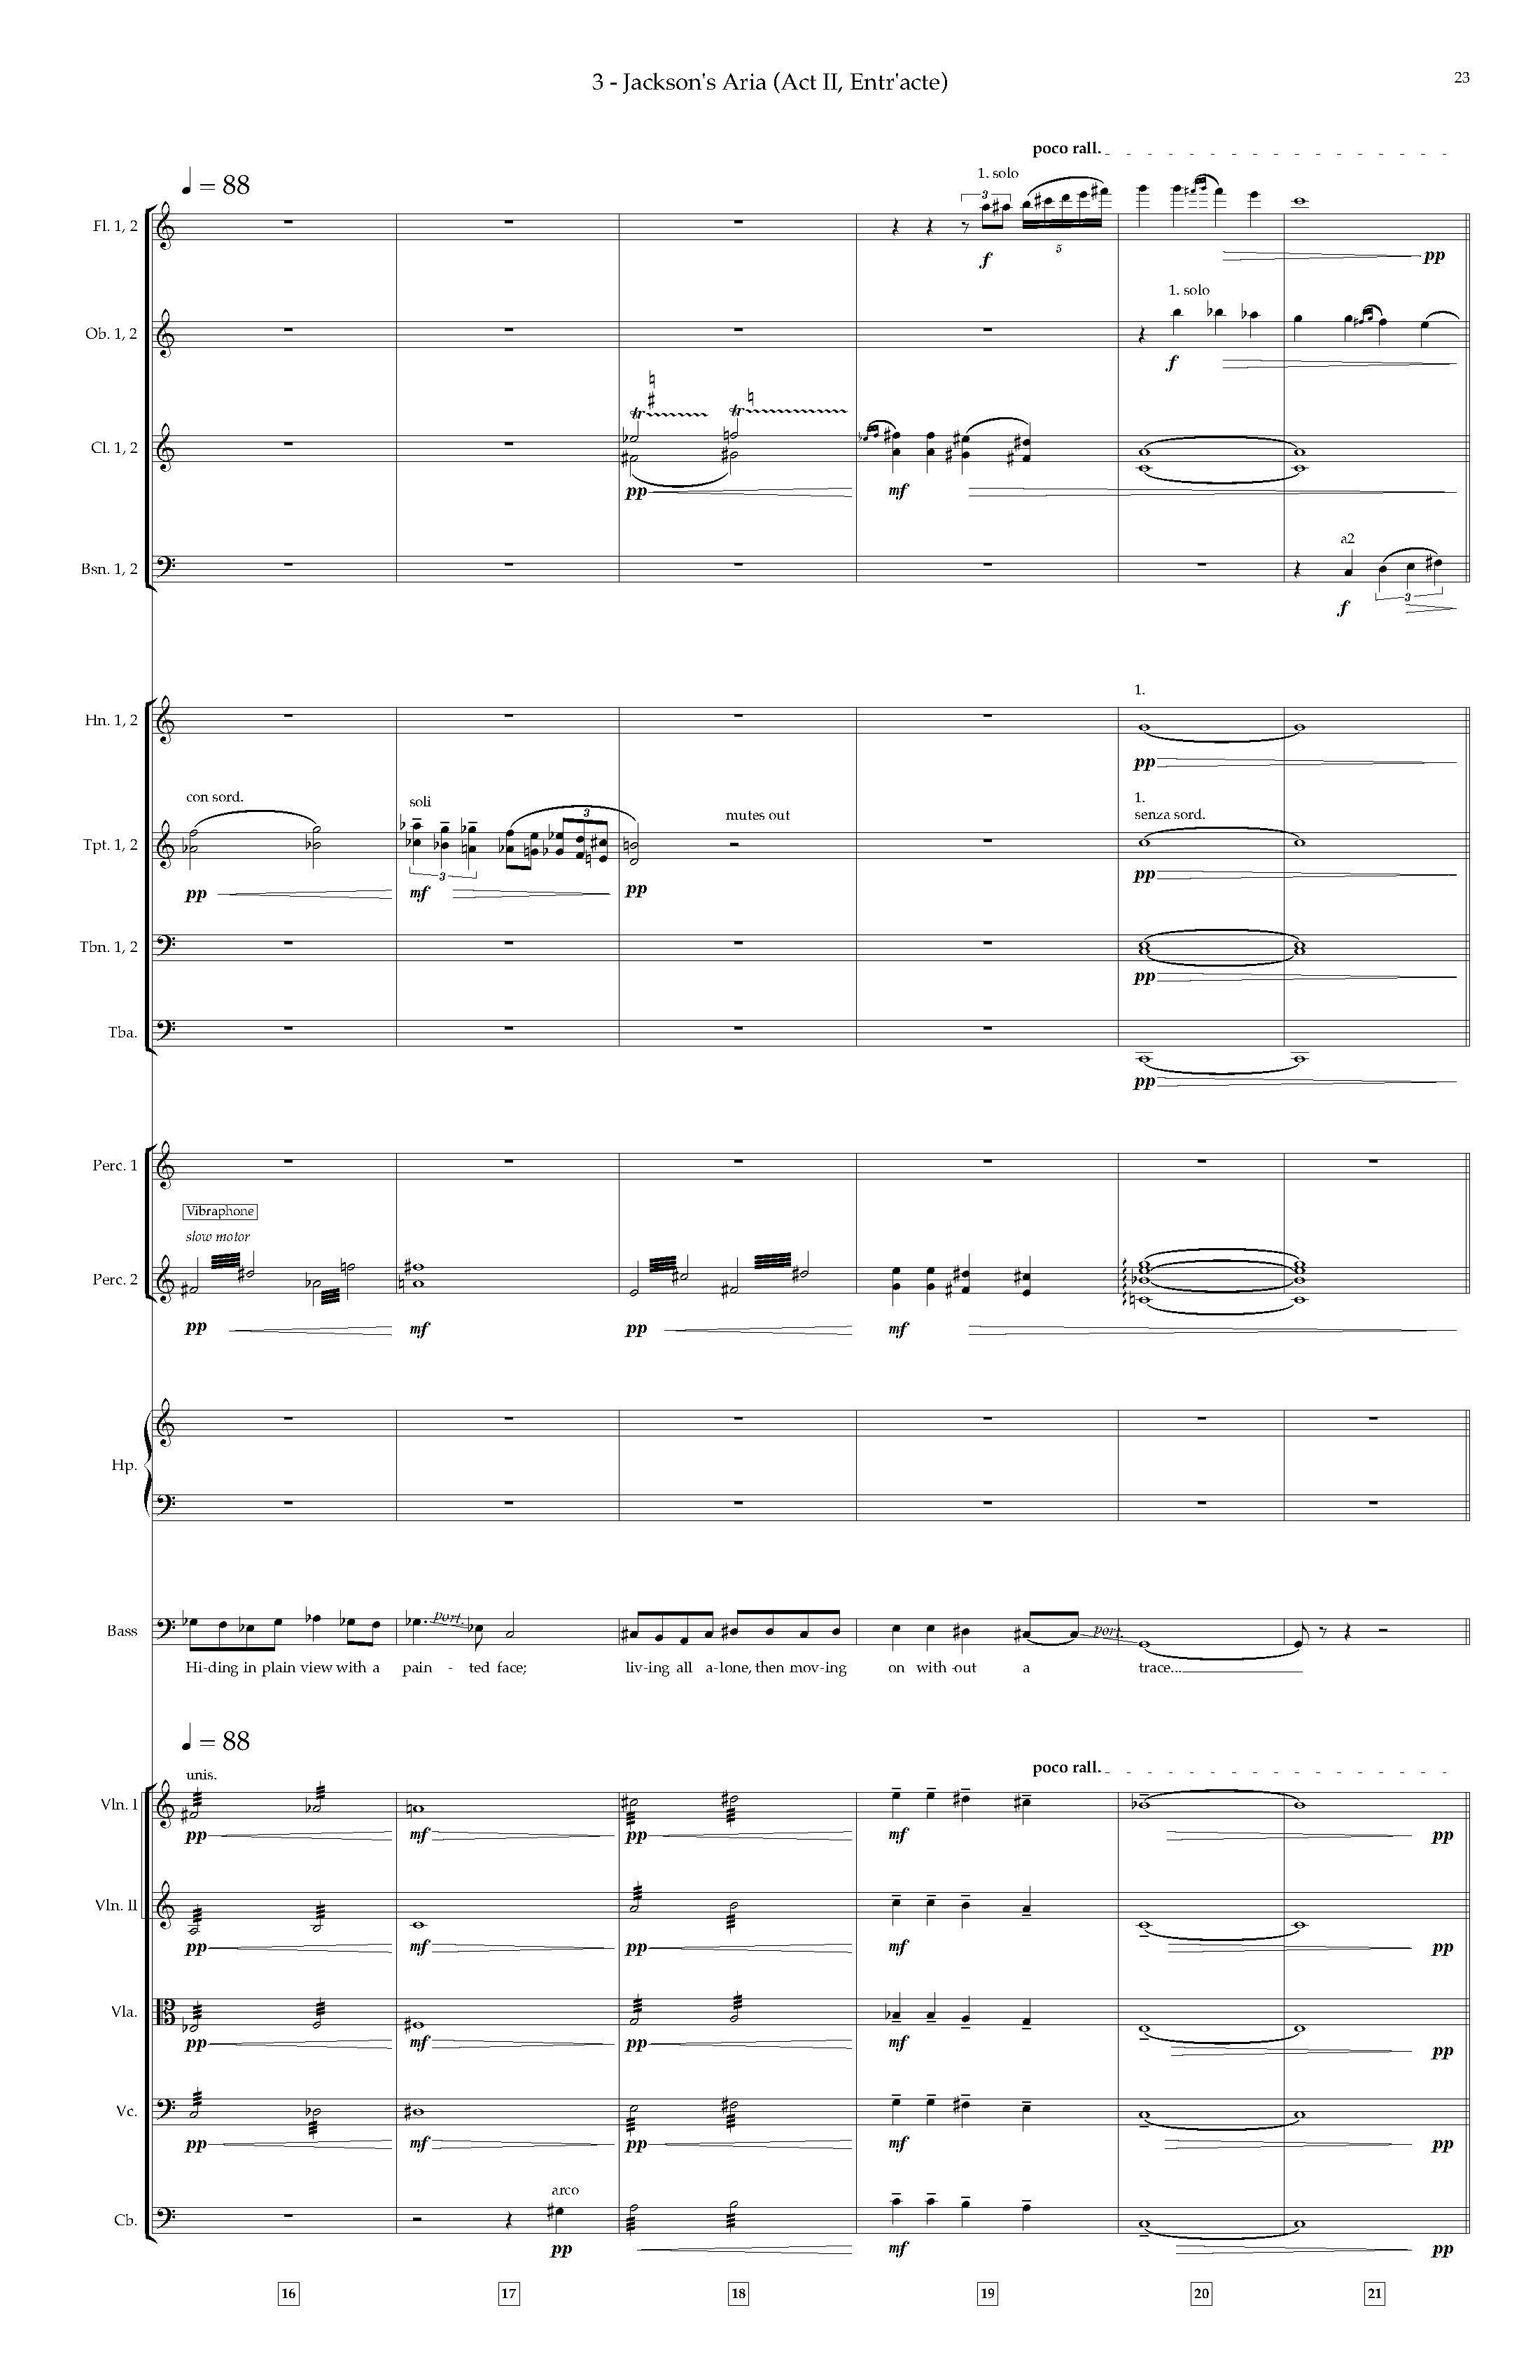 Arias and Interludes from HWGS - Complete Score_Page_29.jpg